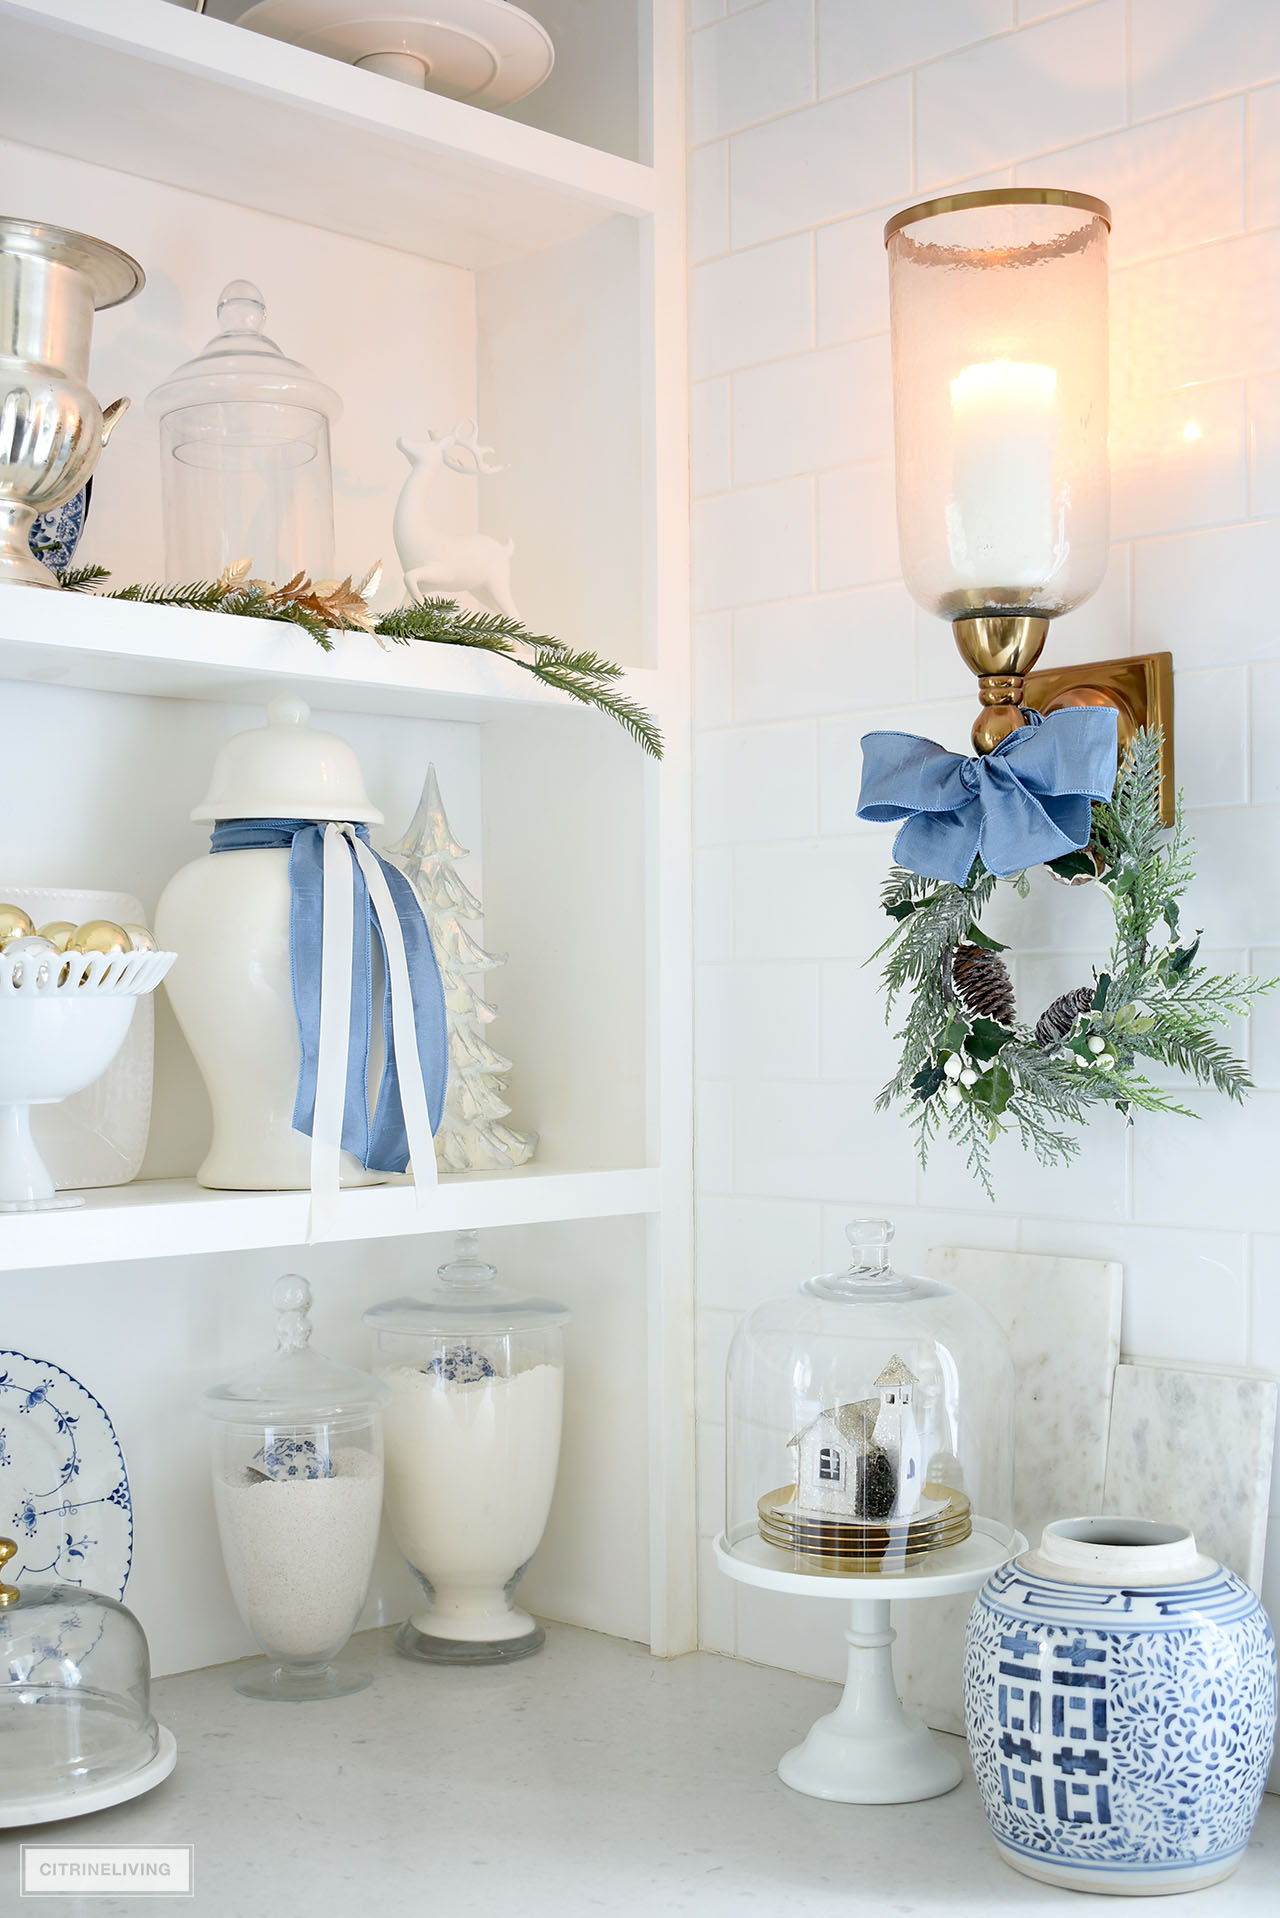 Corner detail of open kitchen shelves and gold wall sconce, decorated for Christmas with blue and white accents and greenery.